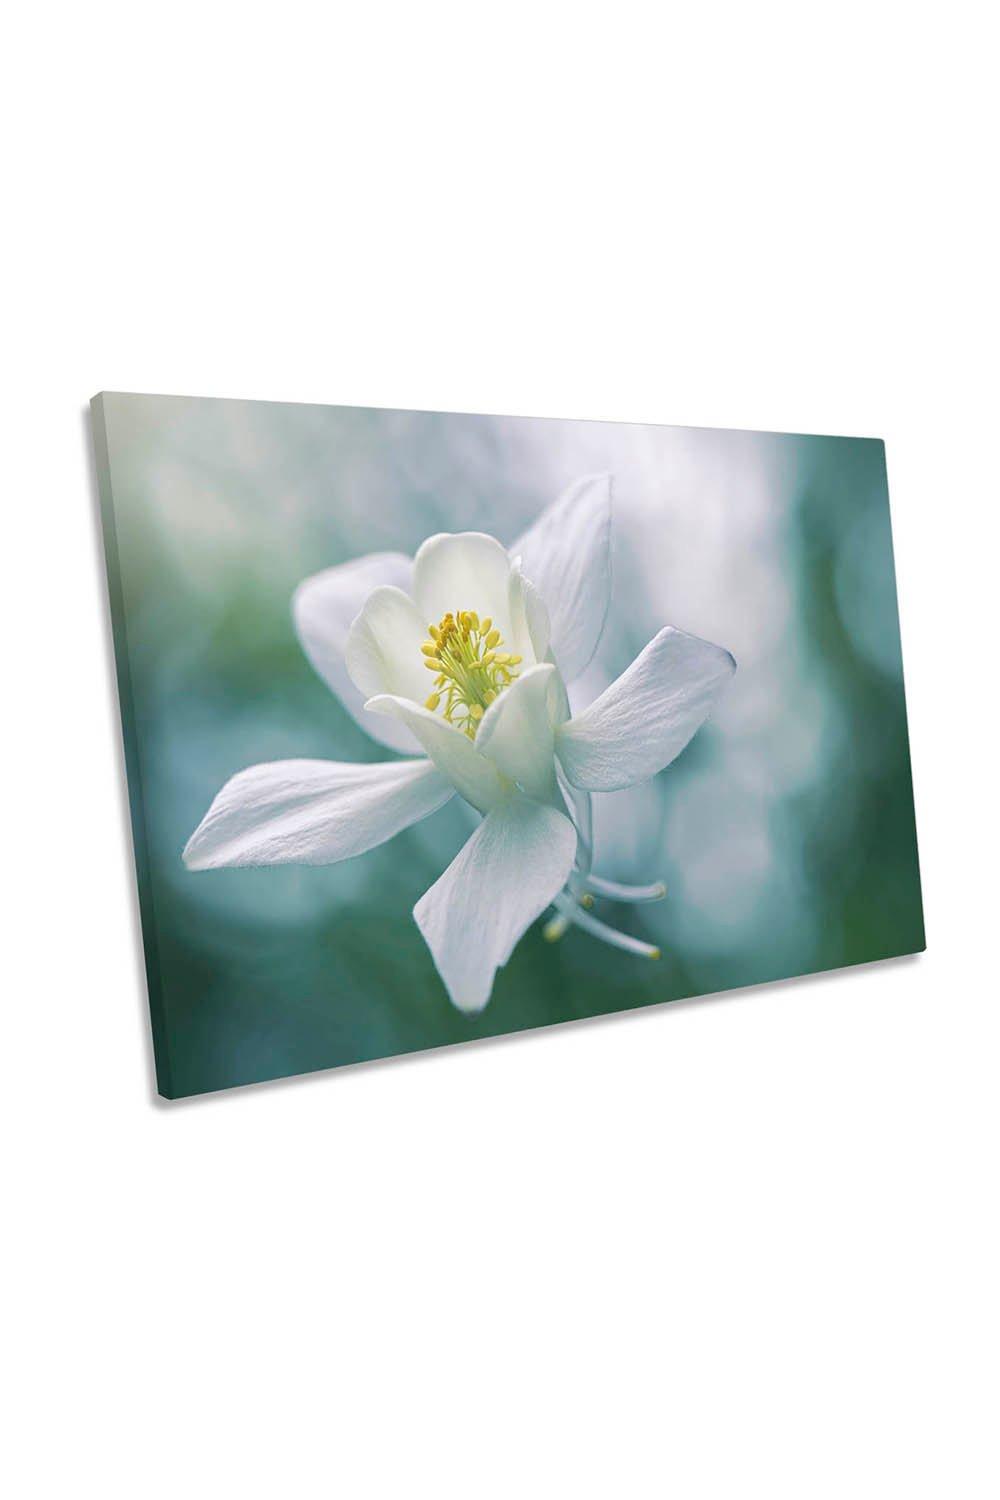 Purity White Flower Petals Canvas Wall Art Picture Print